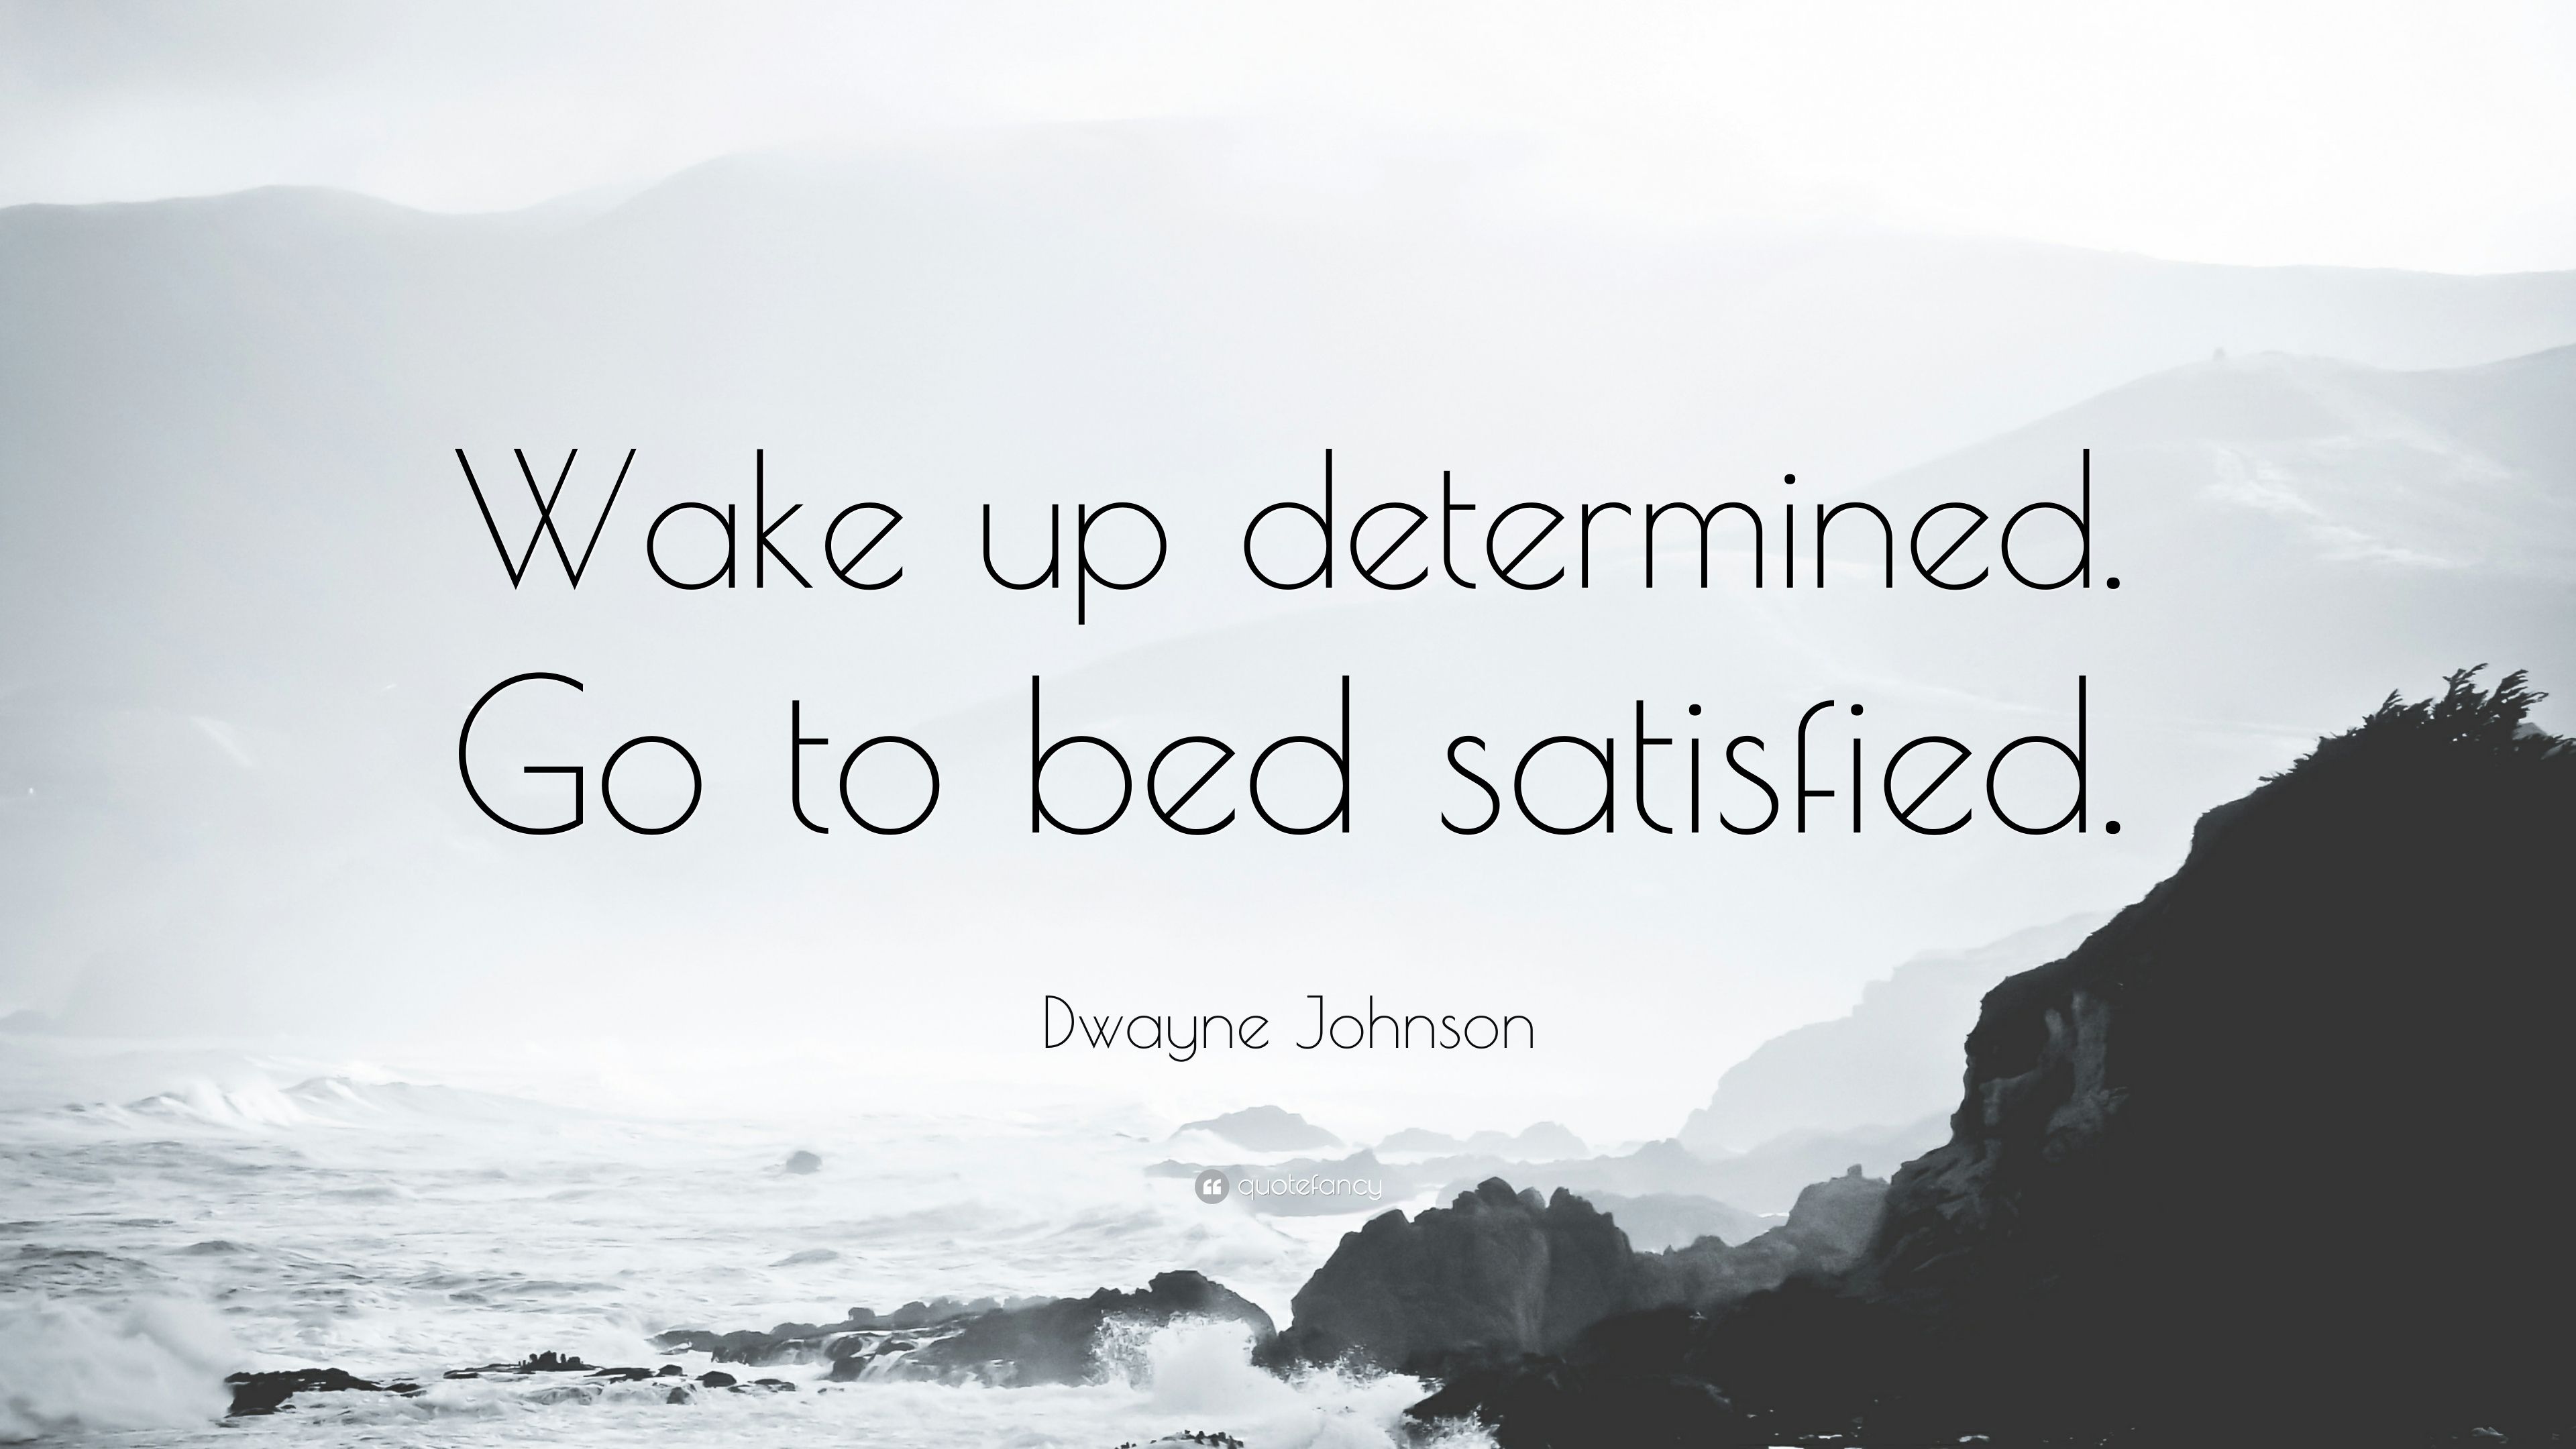 Dwayne Johnson Quote: “Wake up determined. Go to bed satisfied.” (12 wallpaper)